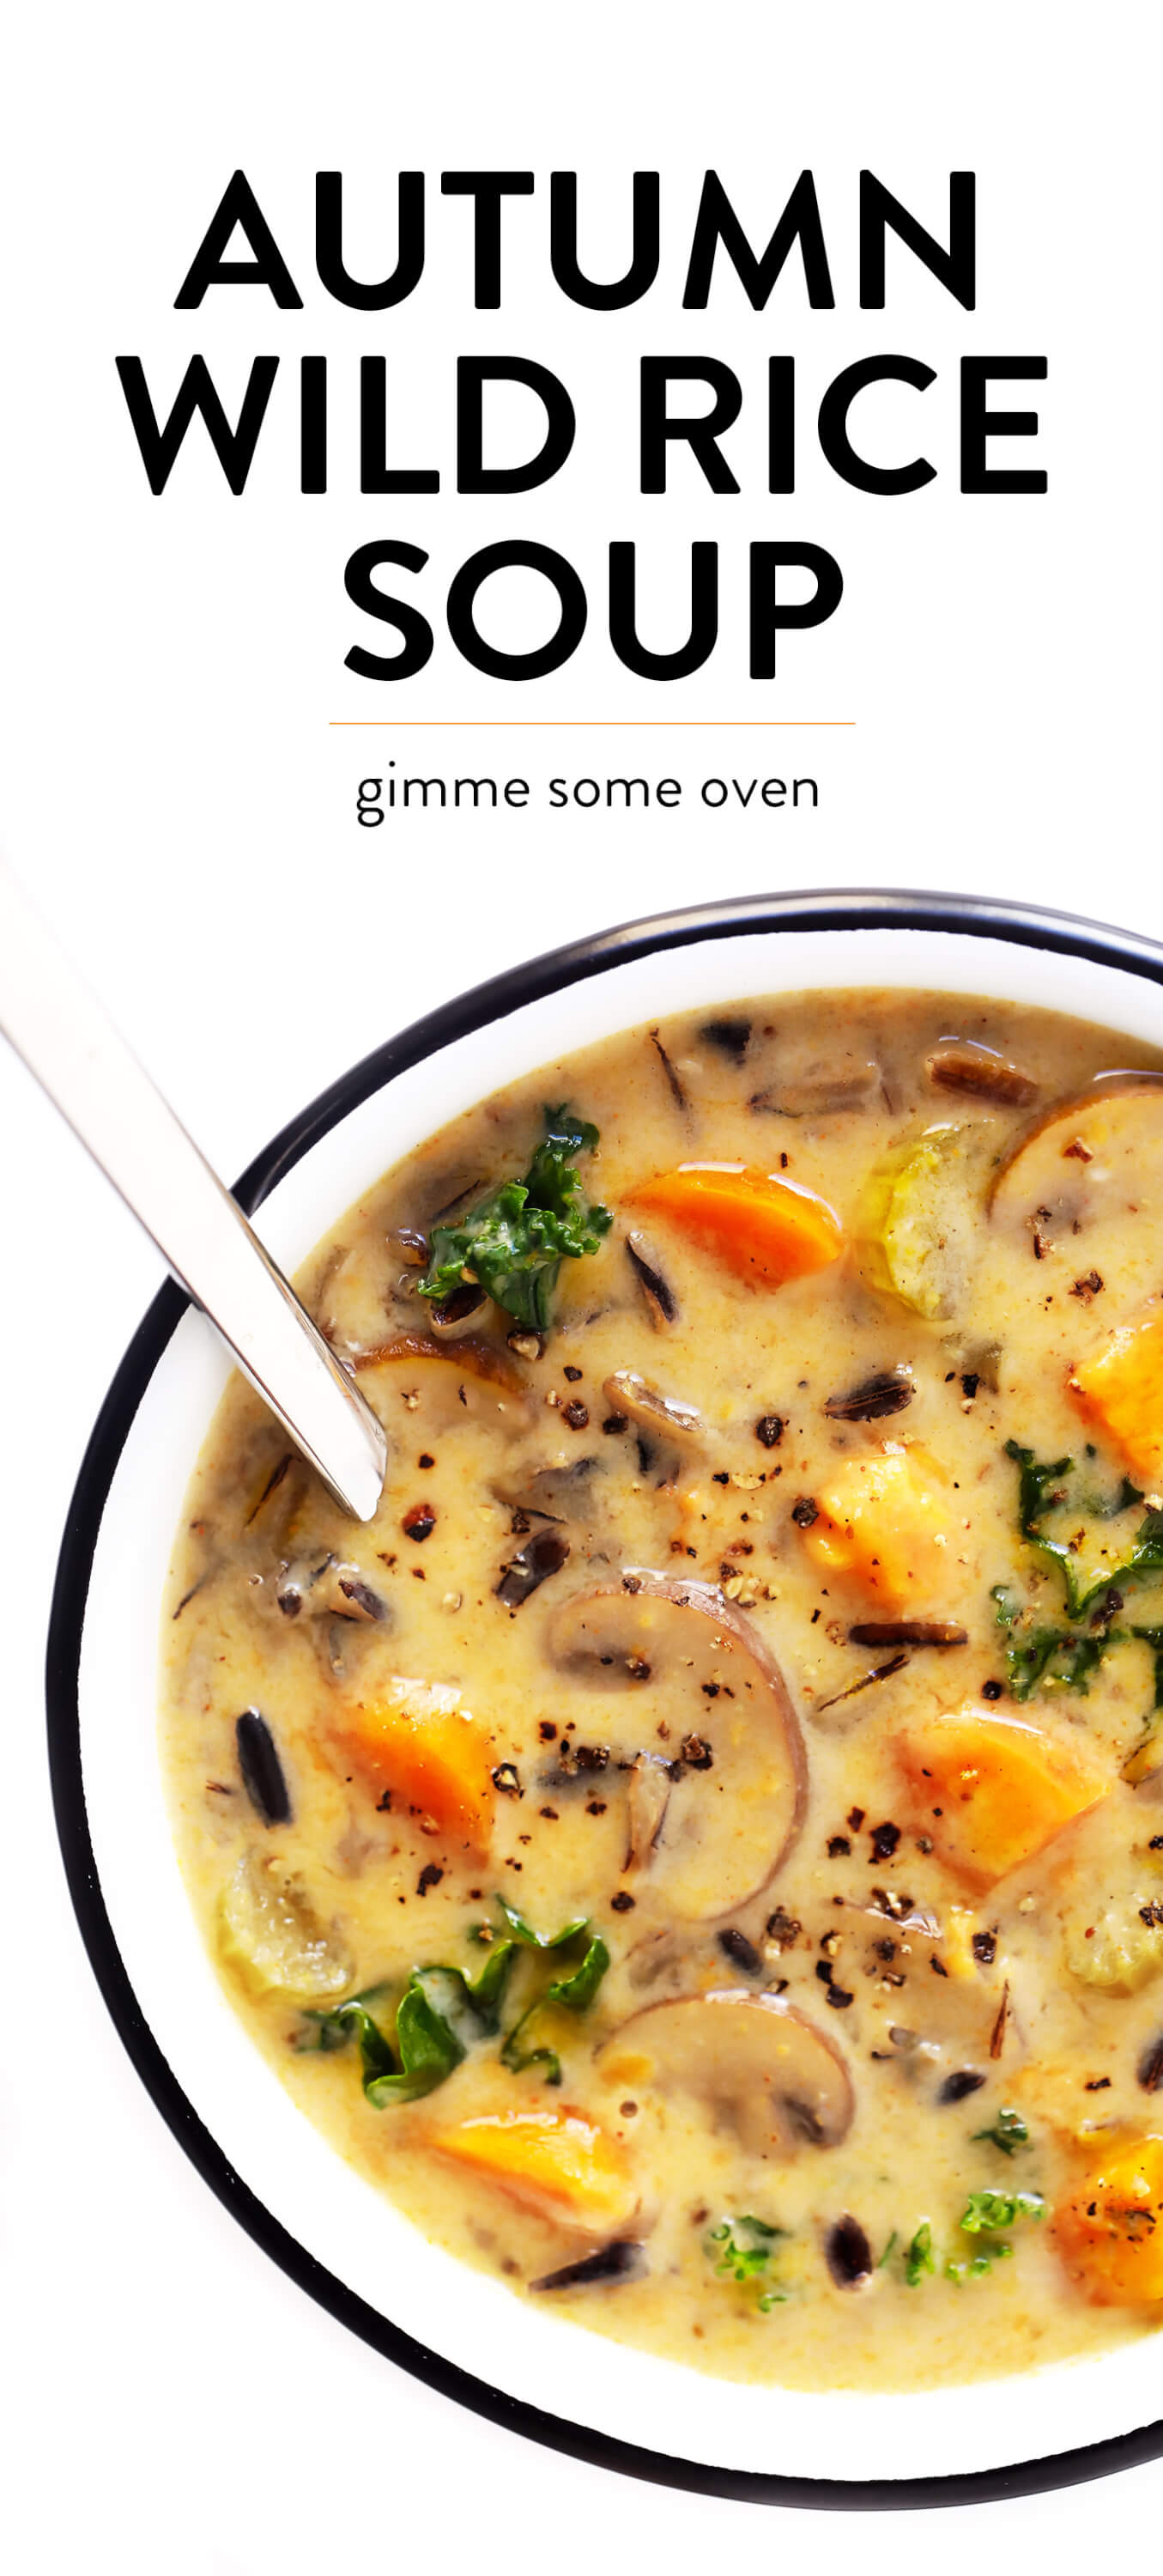 Vegetarian Cozy Autumn Wild Rice Soup from Gimme Some Oven